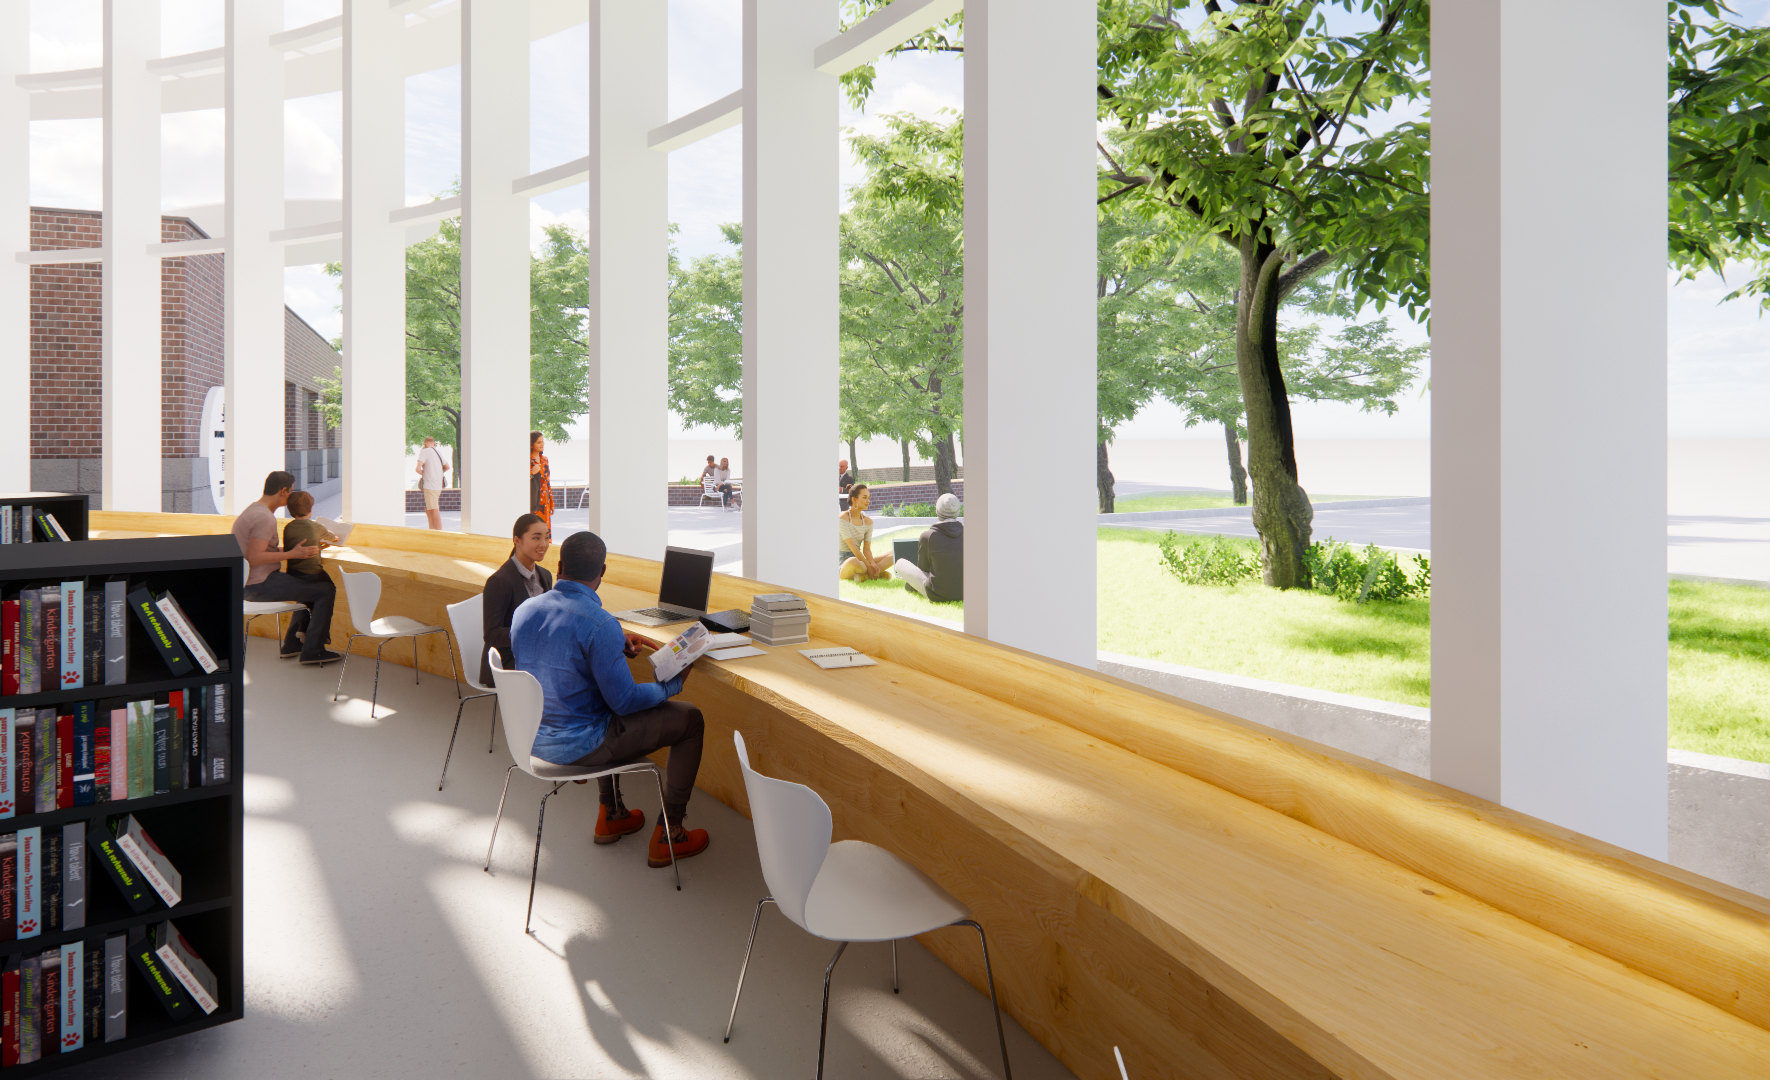 artist impression of the new library space